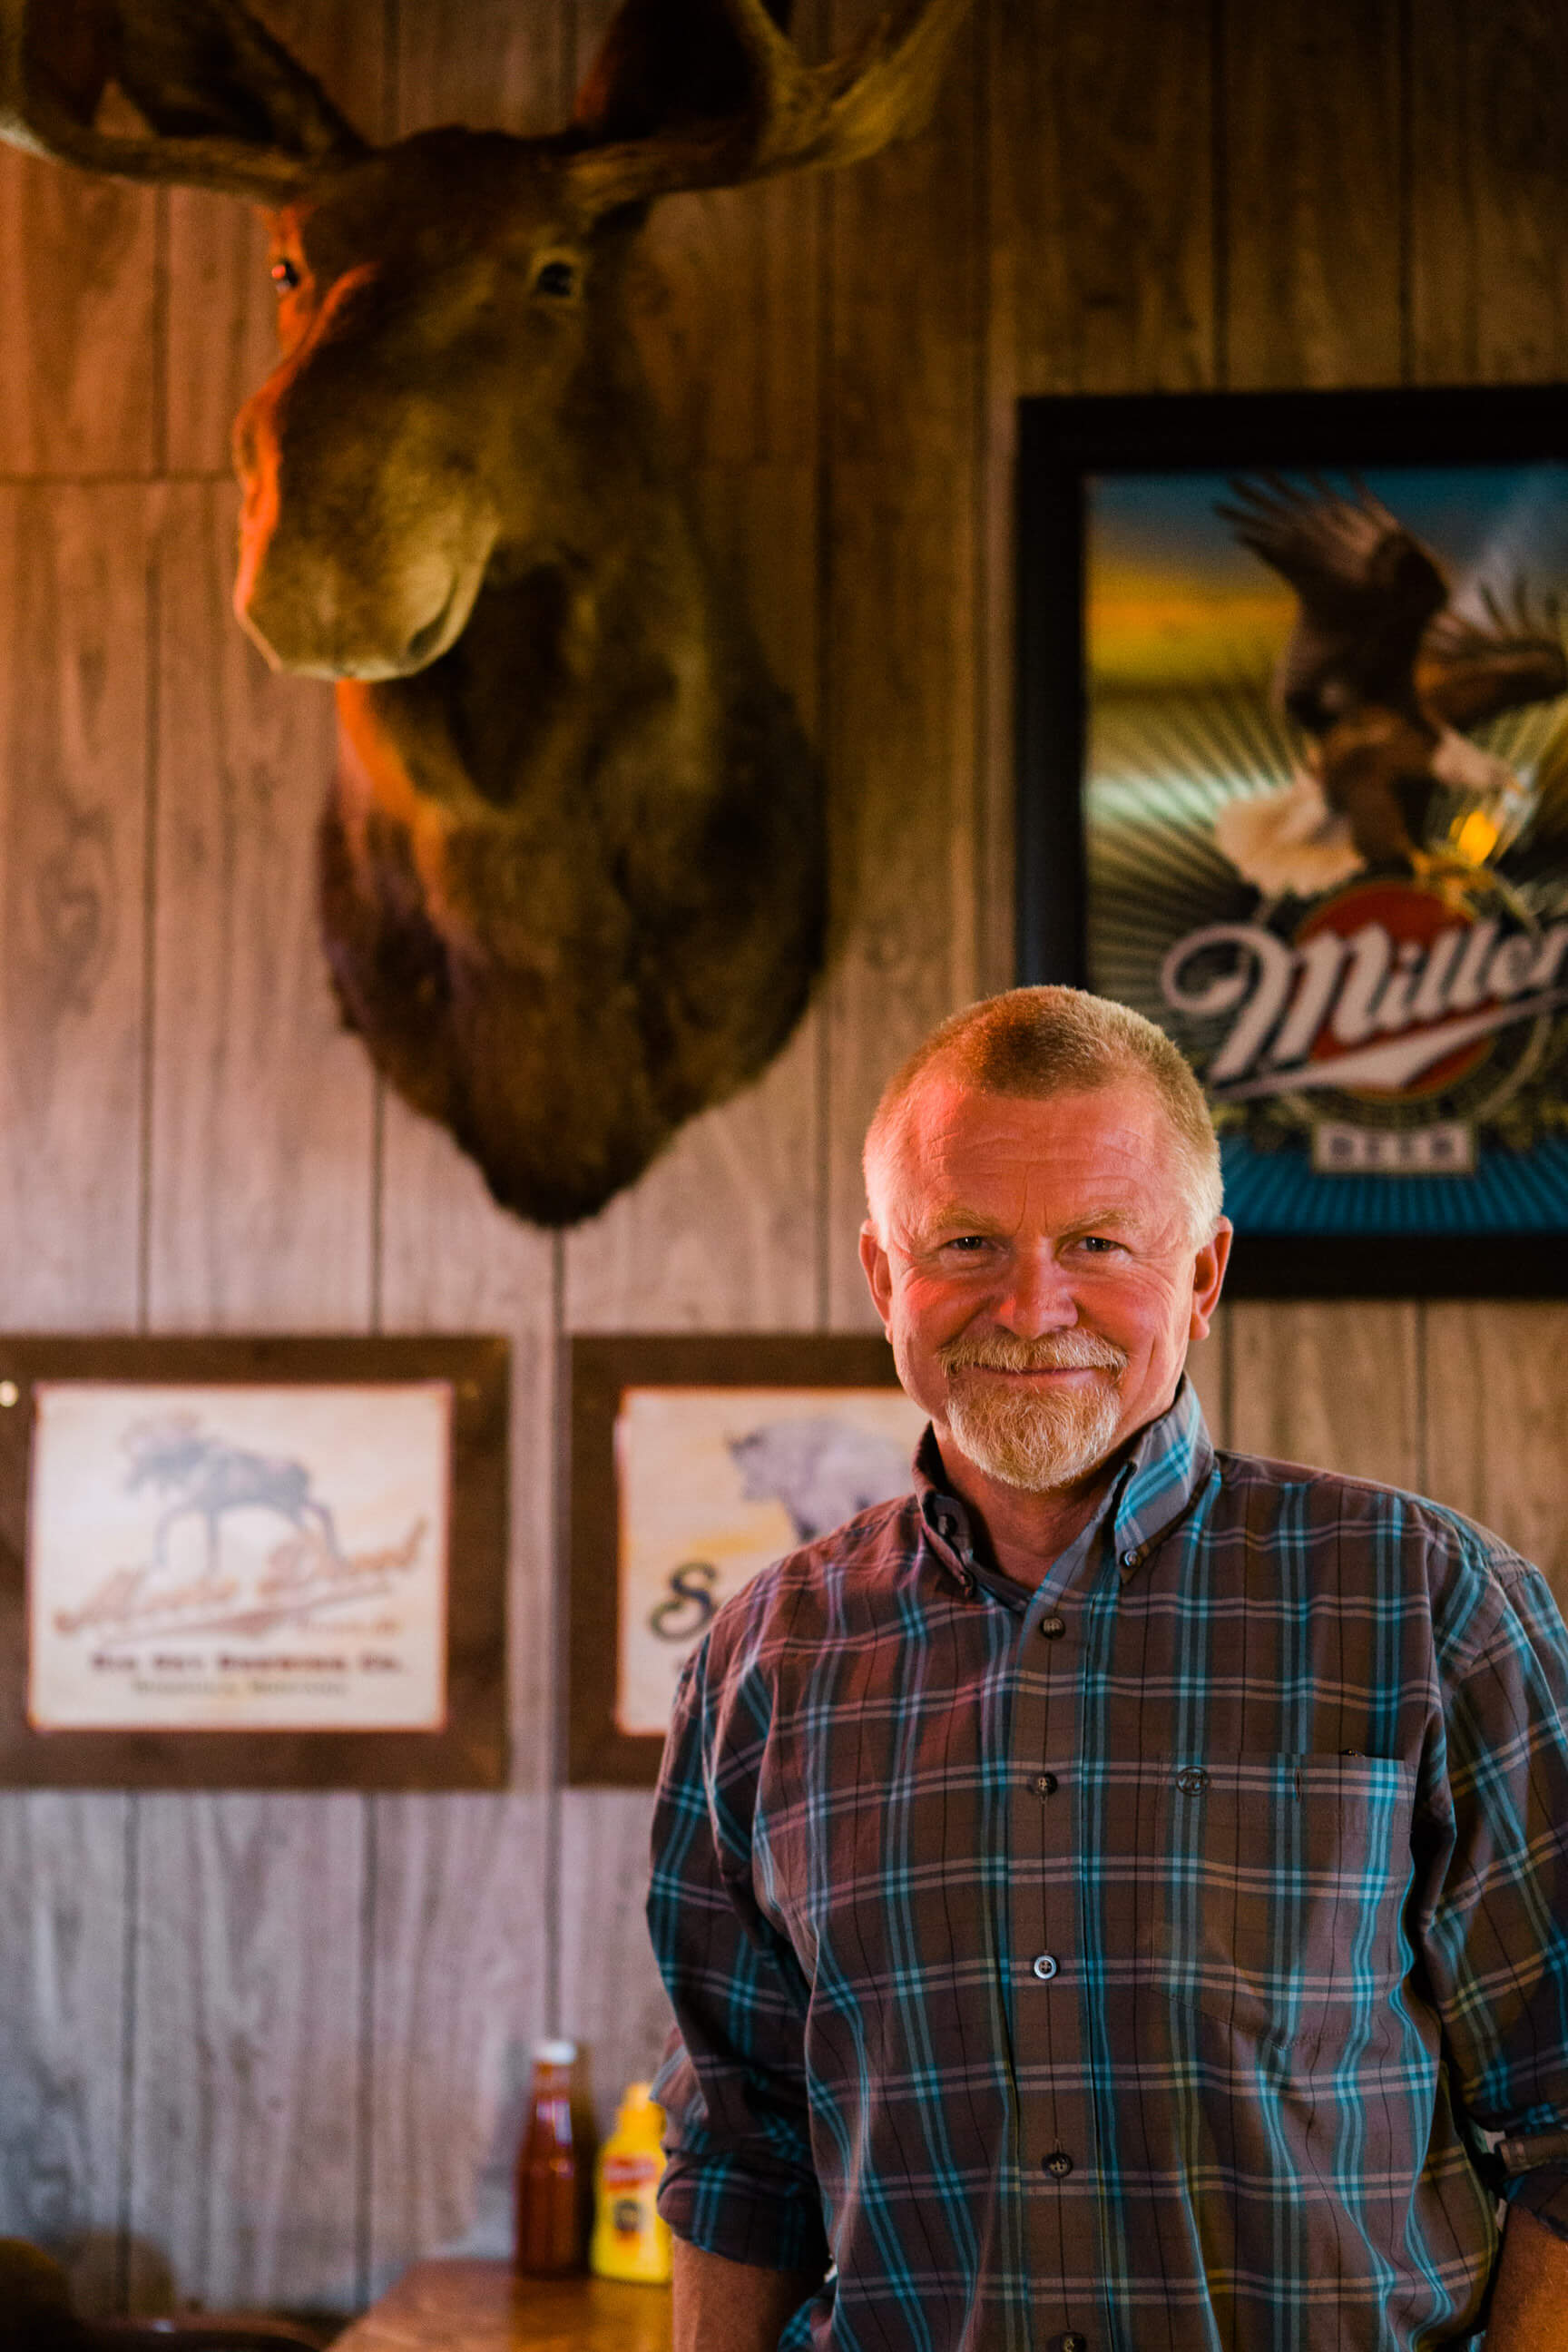 A man poses in front of a mounted moose head at a bar in Ovando Montana